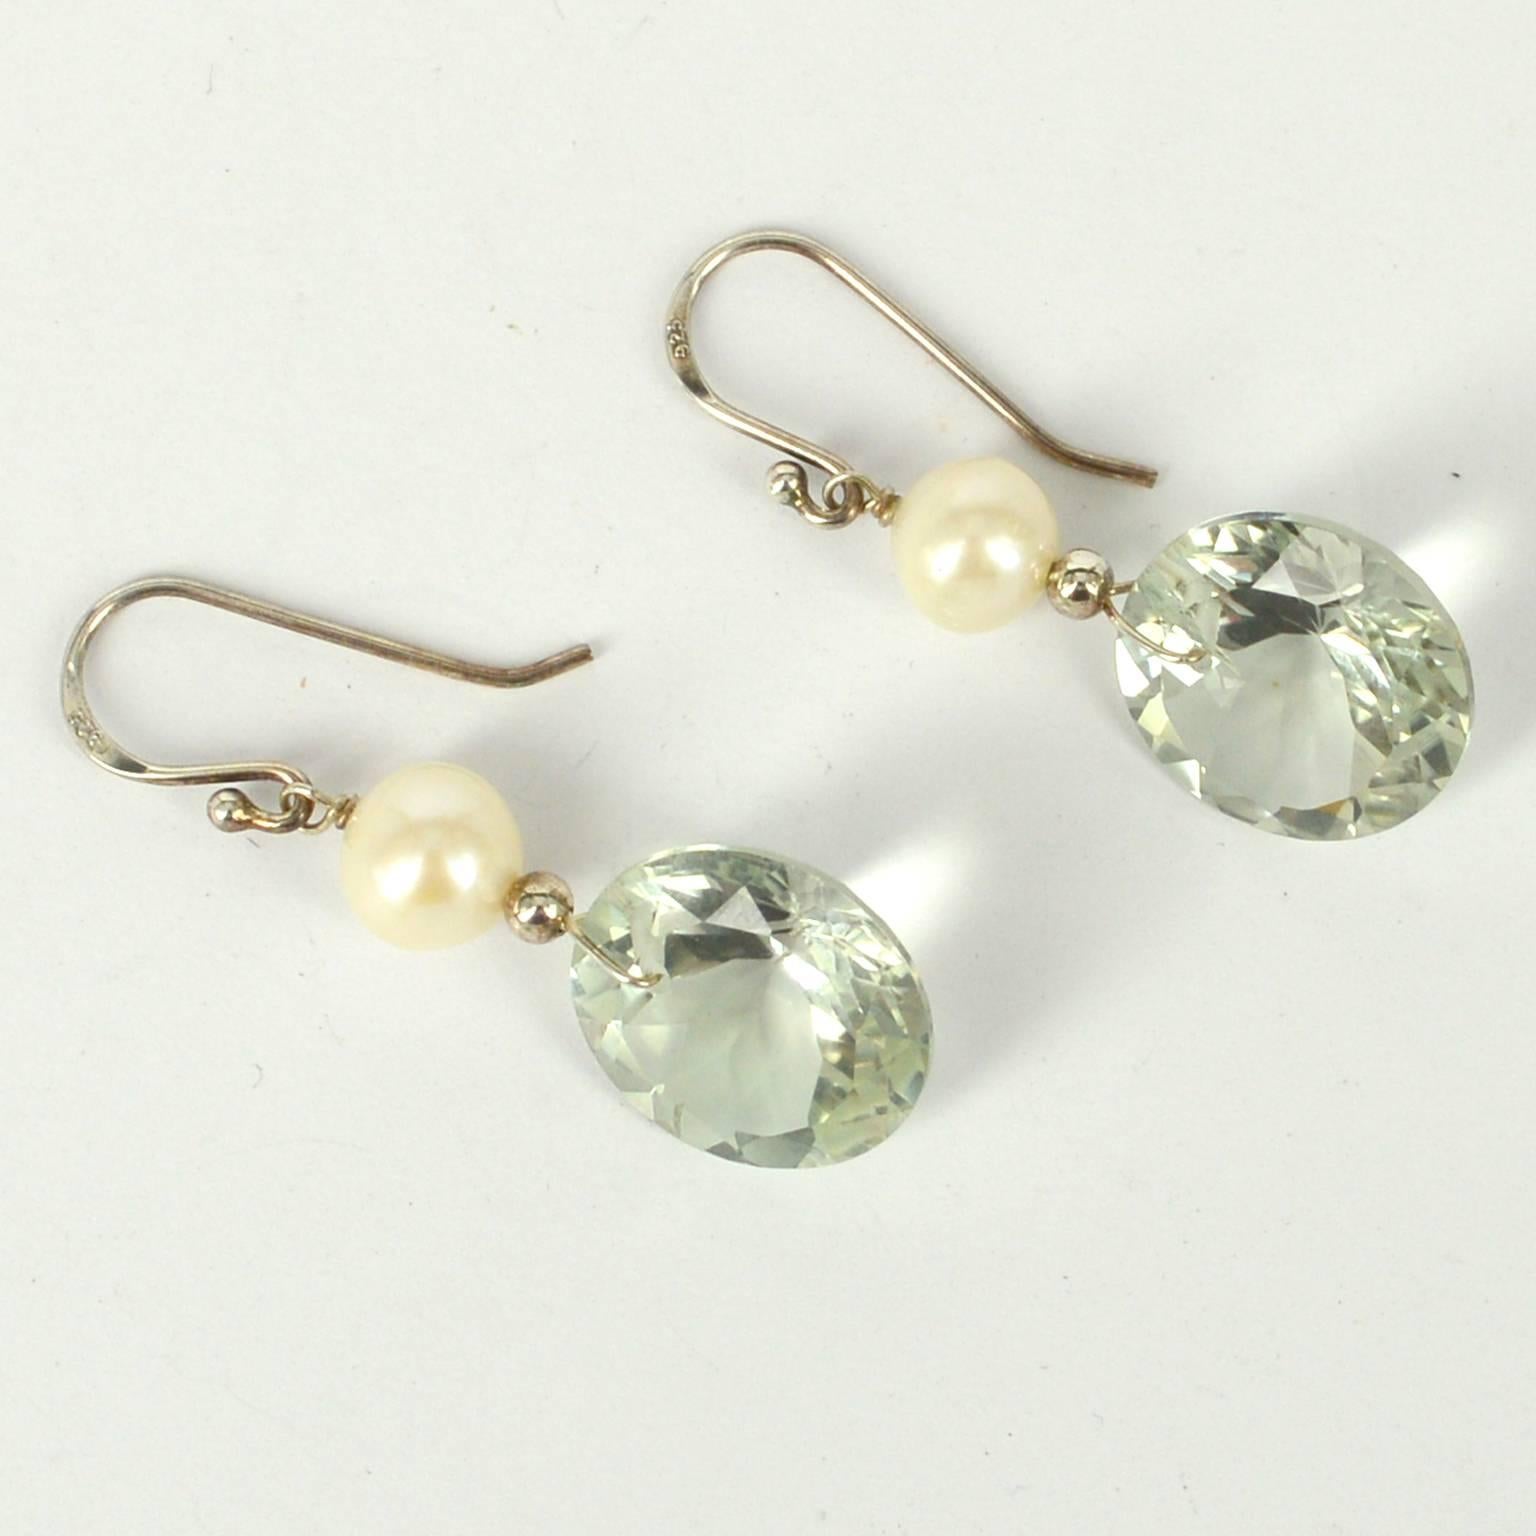 Stunning 17mm top drill Green Amethyst round stones sit below 8mm Fresh Water Pearls with Sterling Silver beads headpins and sheppards.
Finished earrings measure 41mm